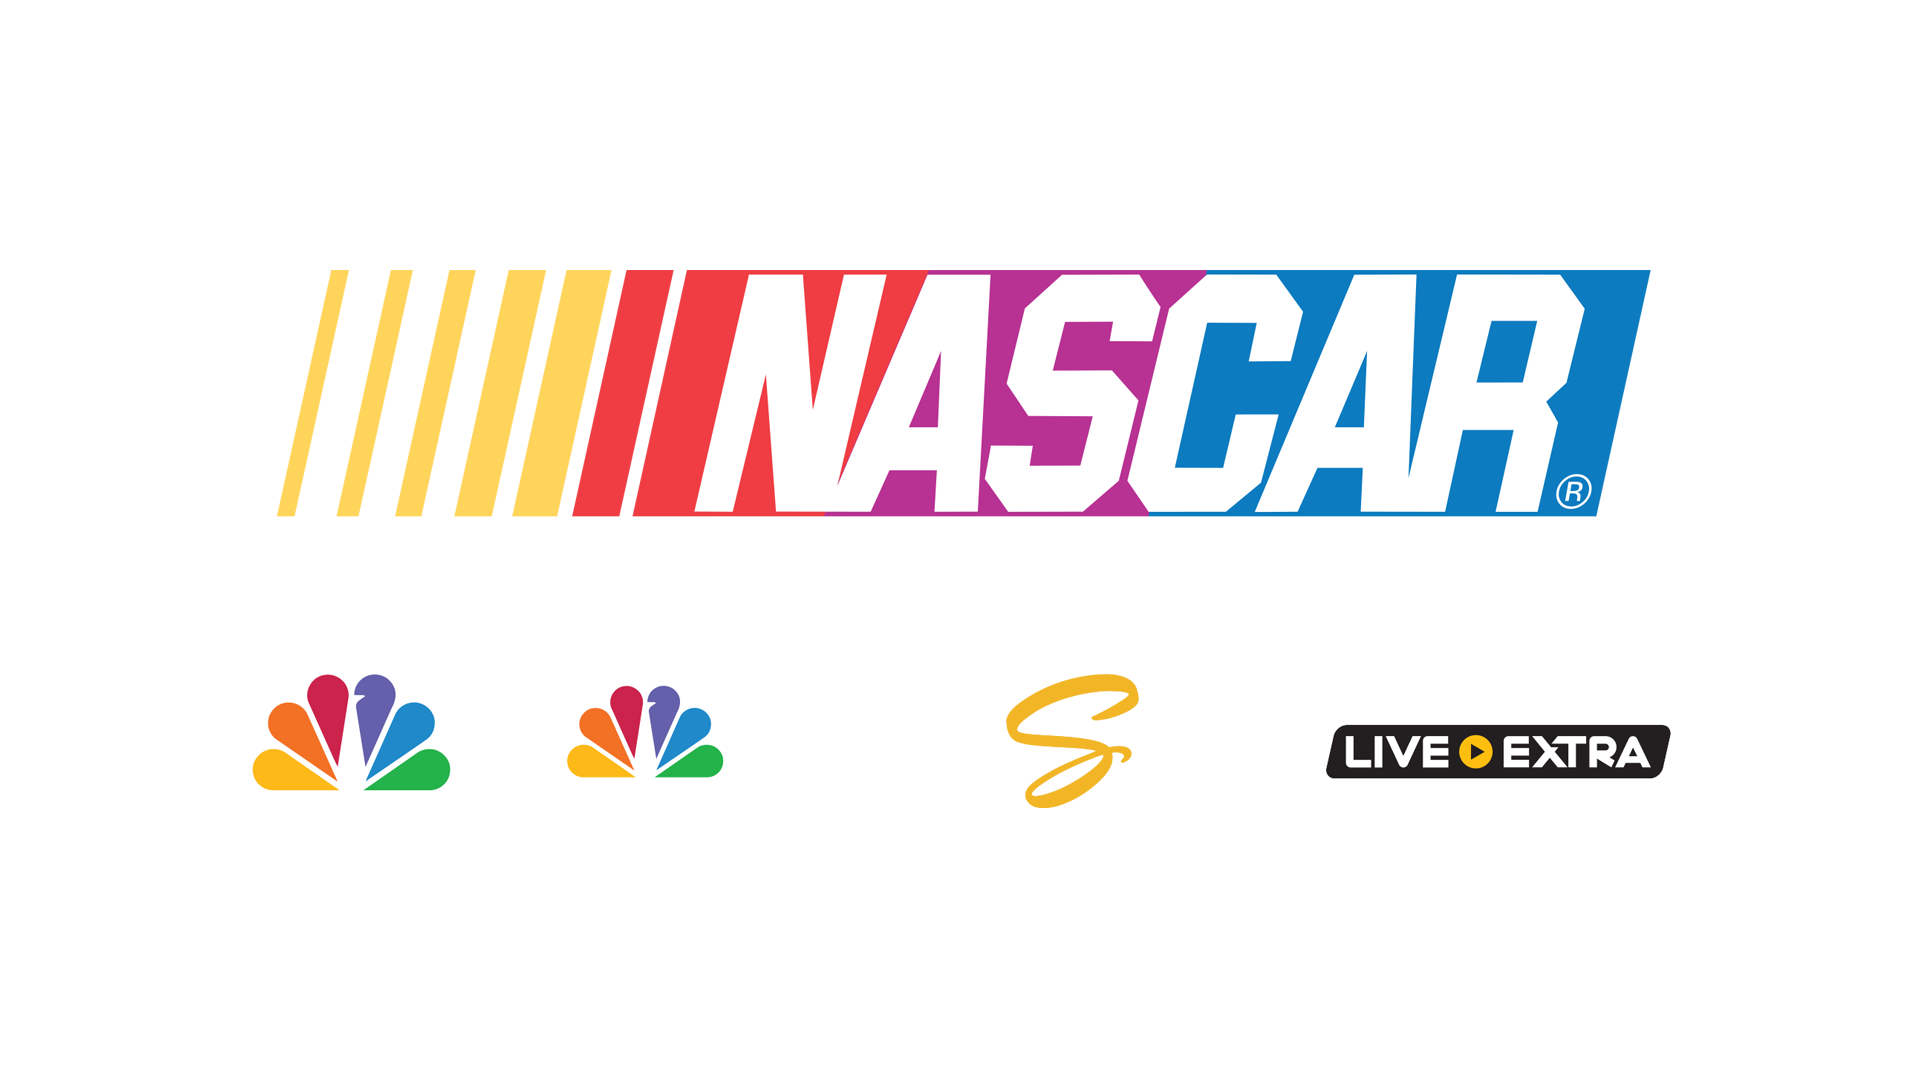 NBC SPORTS LIVE EXTRA GEARS UP FOR NASCAR ON NBC WITH EXCLUSIVE CAMERA ANGLES AND INTERACTIVE FEATURES